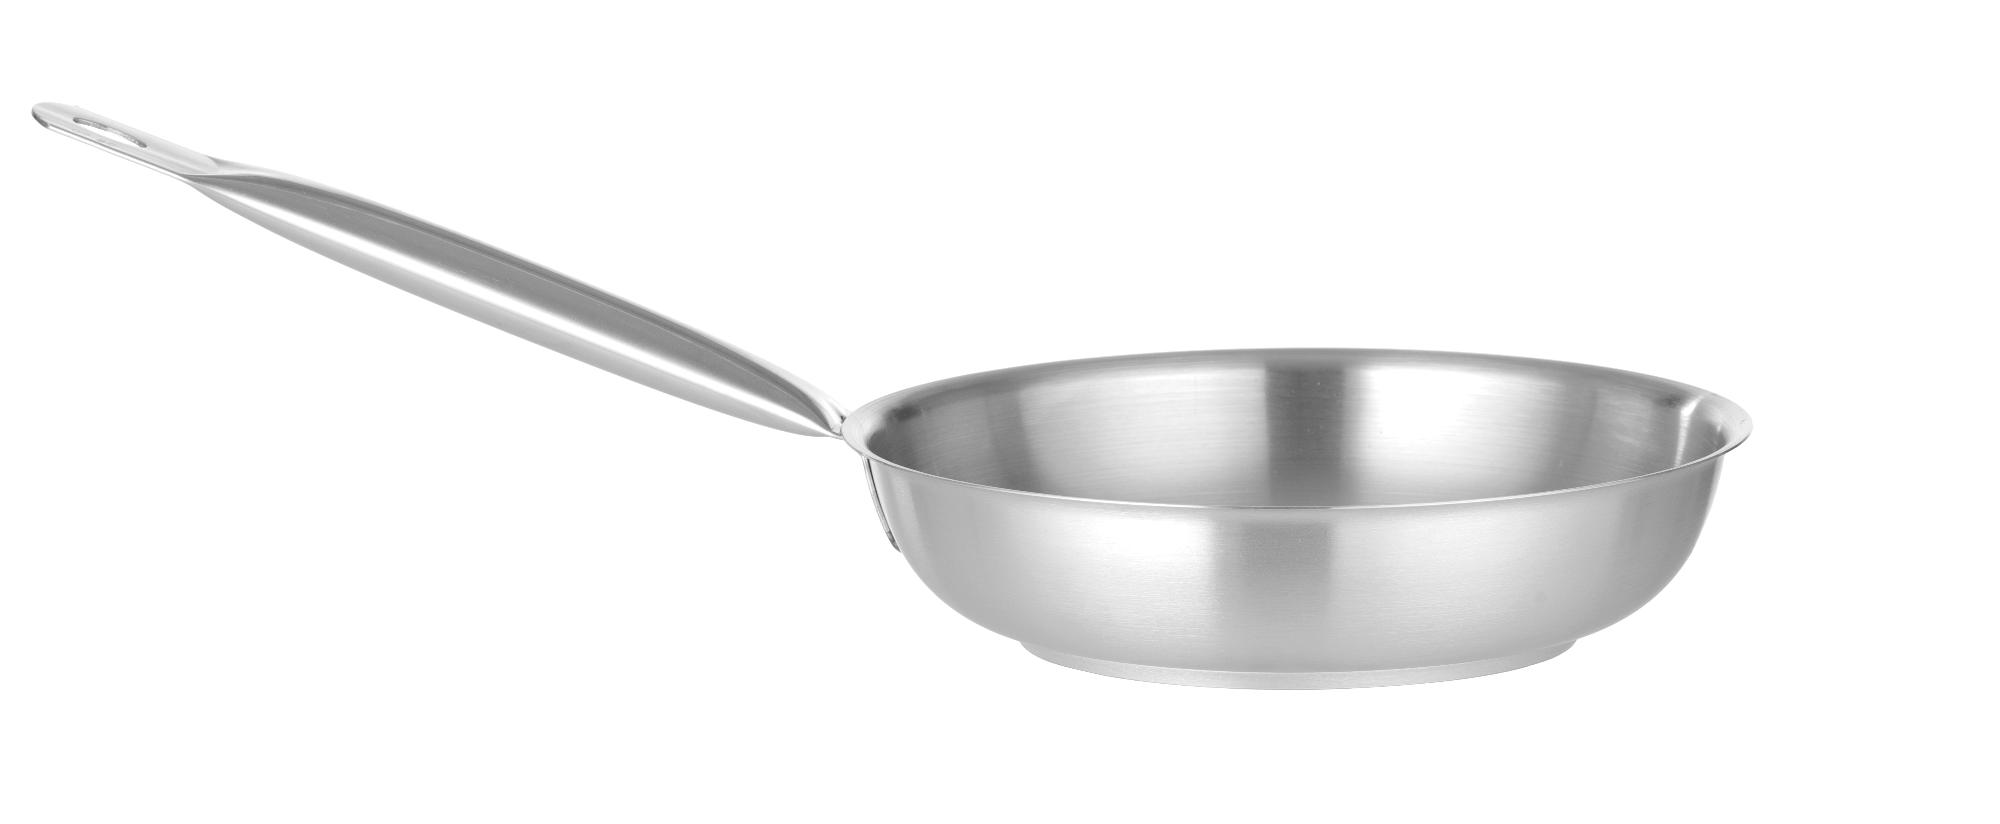 Stainless steel frying pan, 360mm